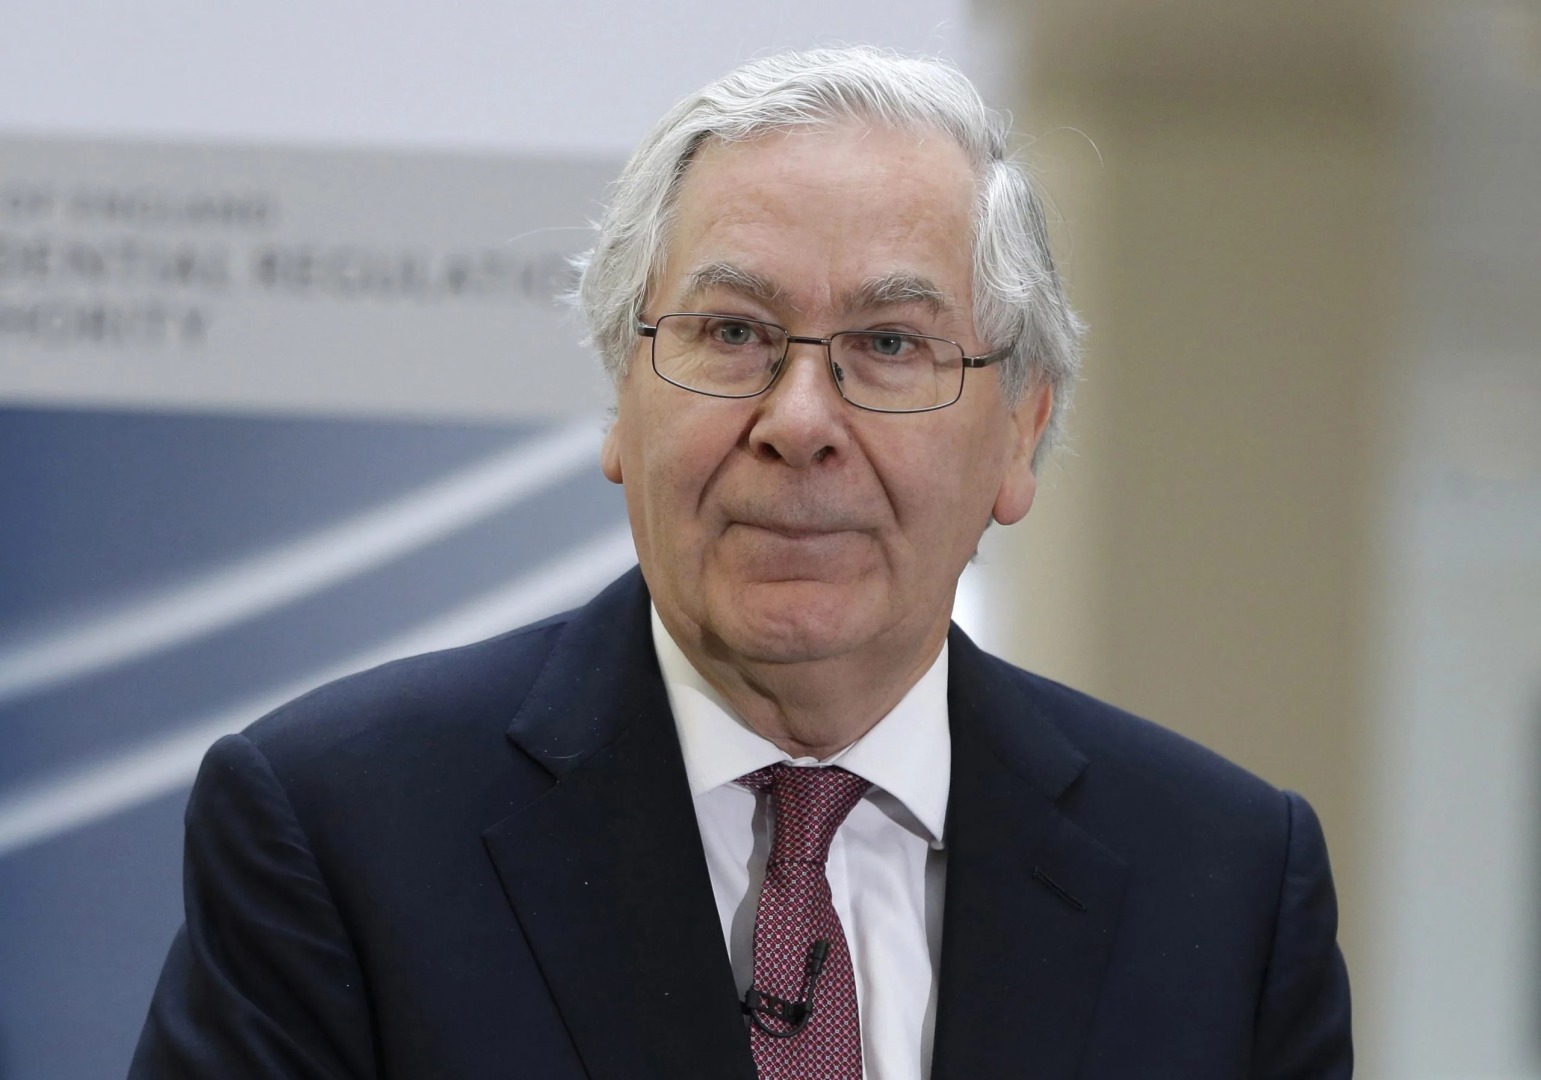 Mervyn King: “Our Ambition at the Bank of England is To Be Boring”